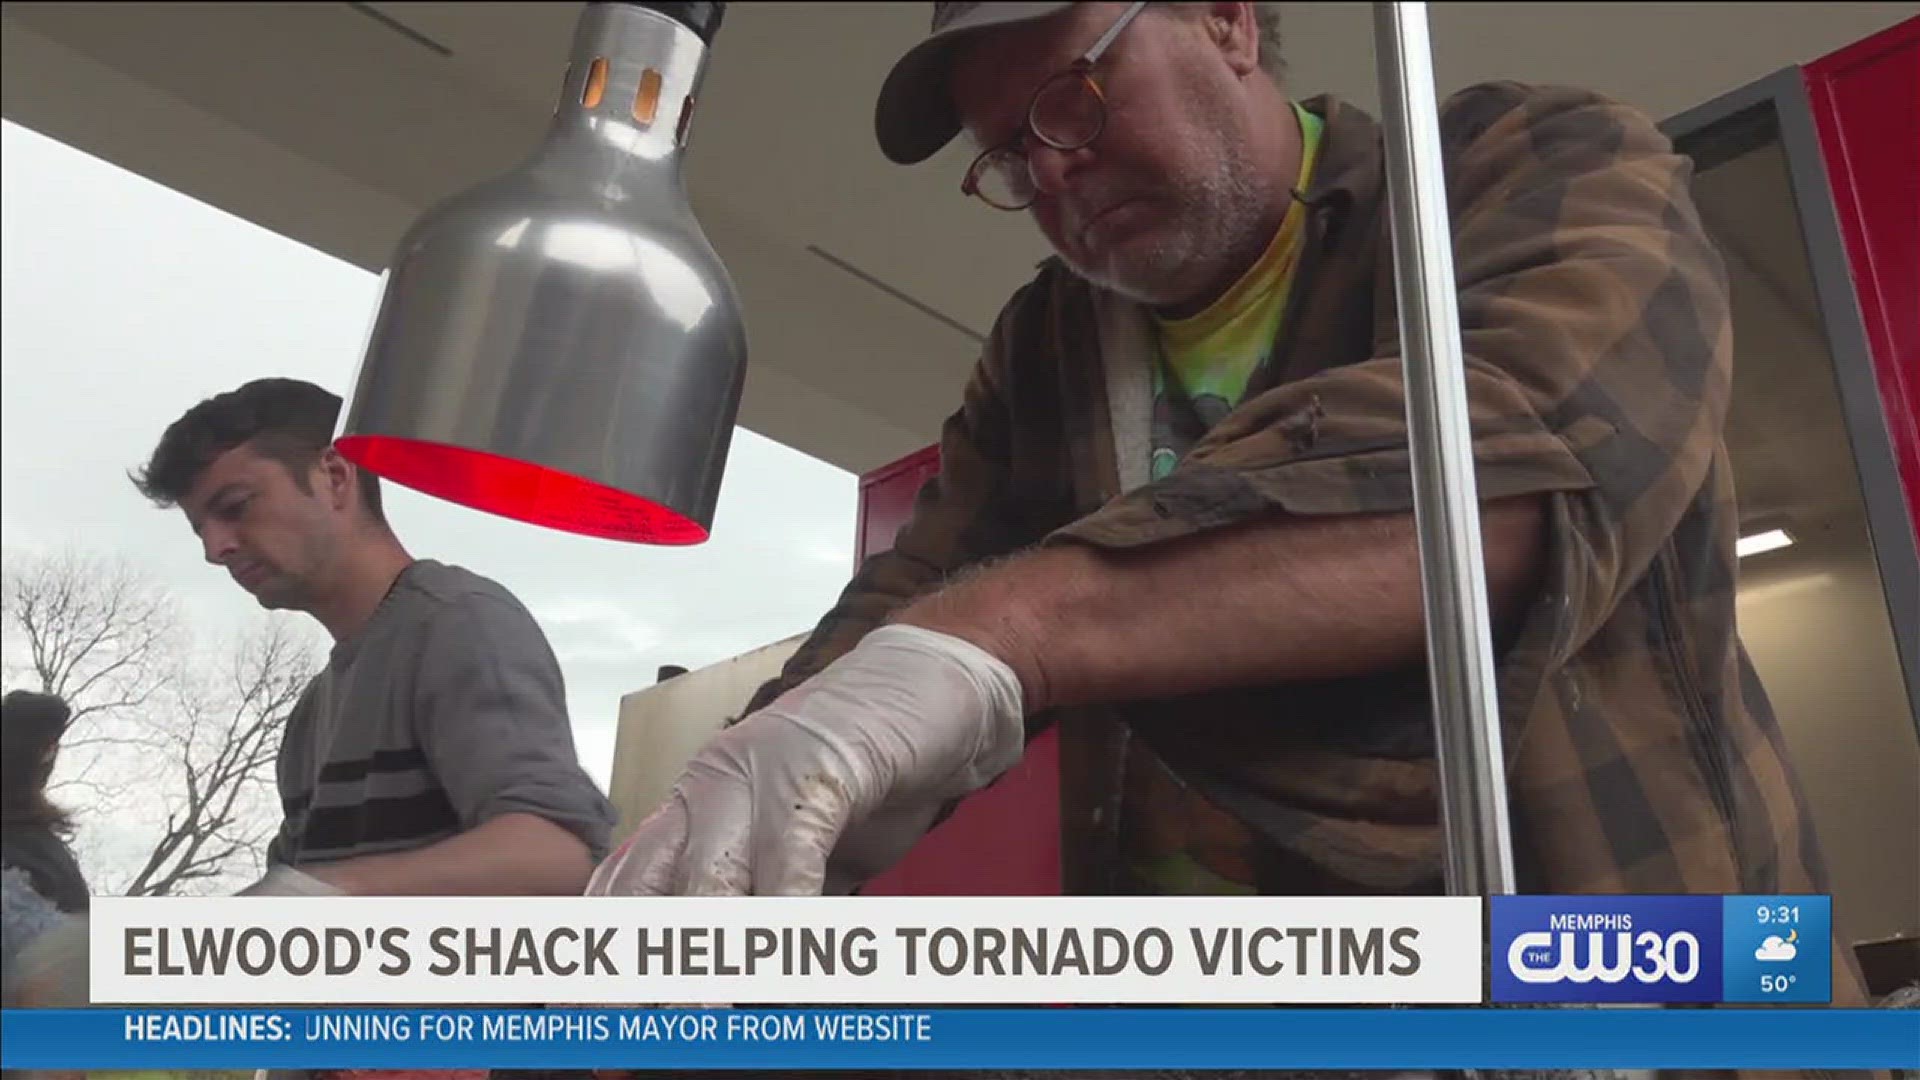 The owner of Elwood's Shack fired up the smoker and helped feed victims of Friday night's storms in Covington.